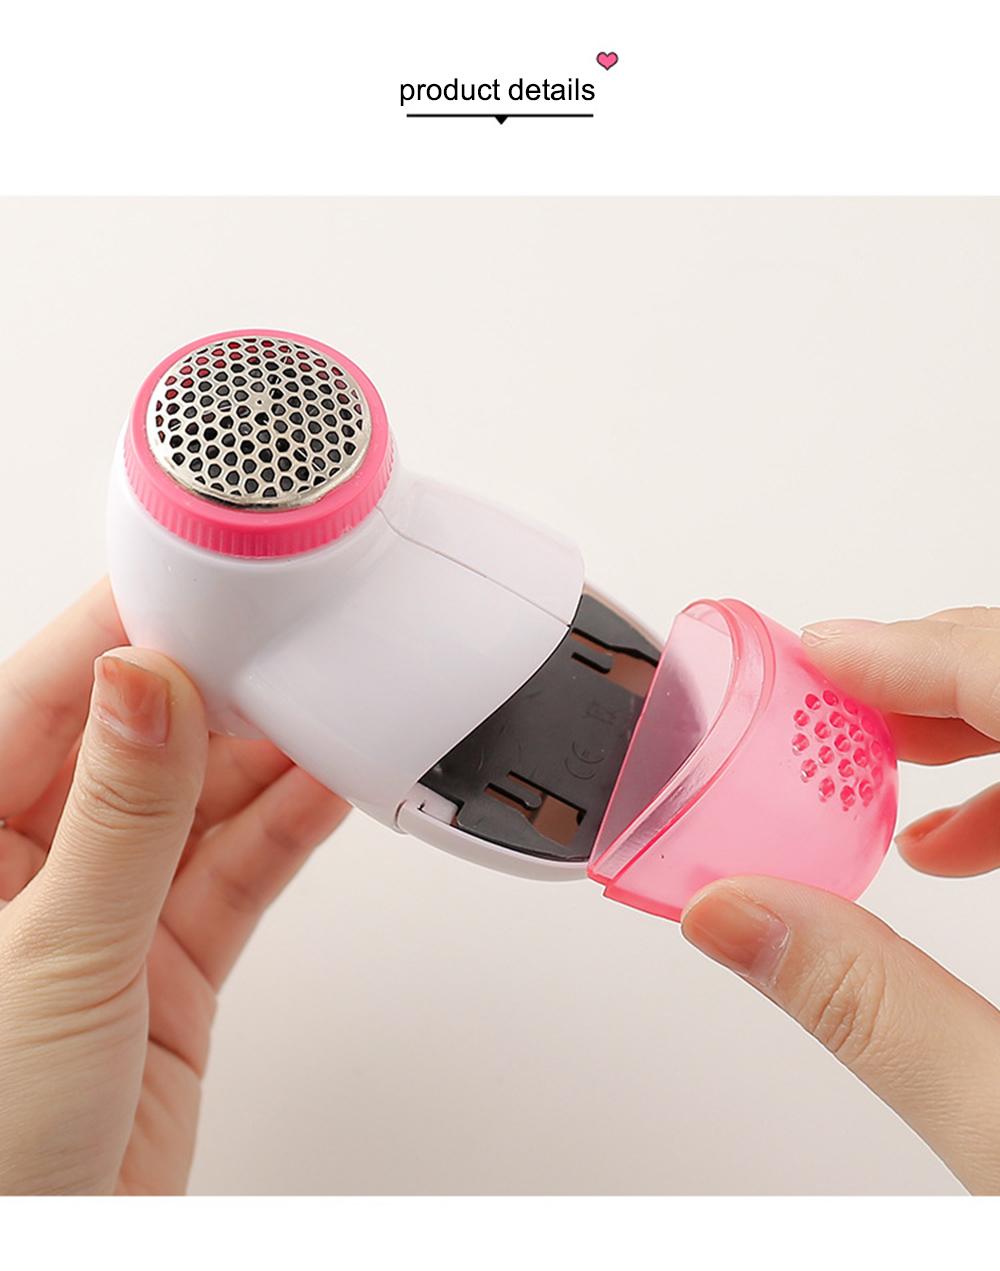 upgrade your clothes with this portable electric sweater pilling machine remove hair balls lint fuzz instantly details 8